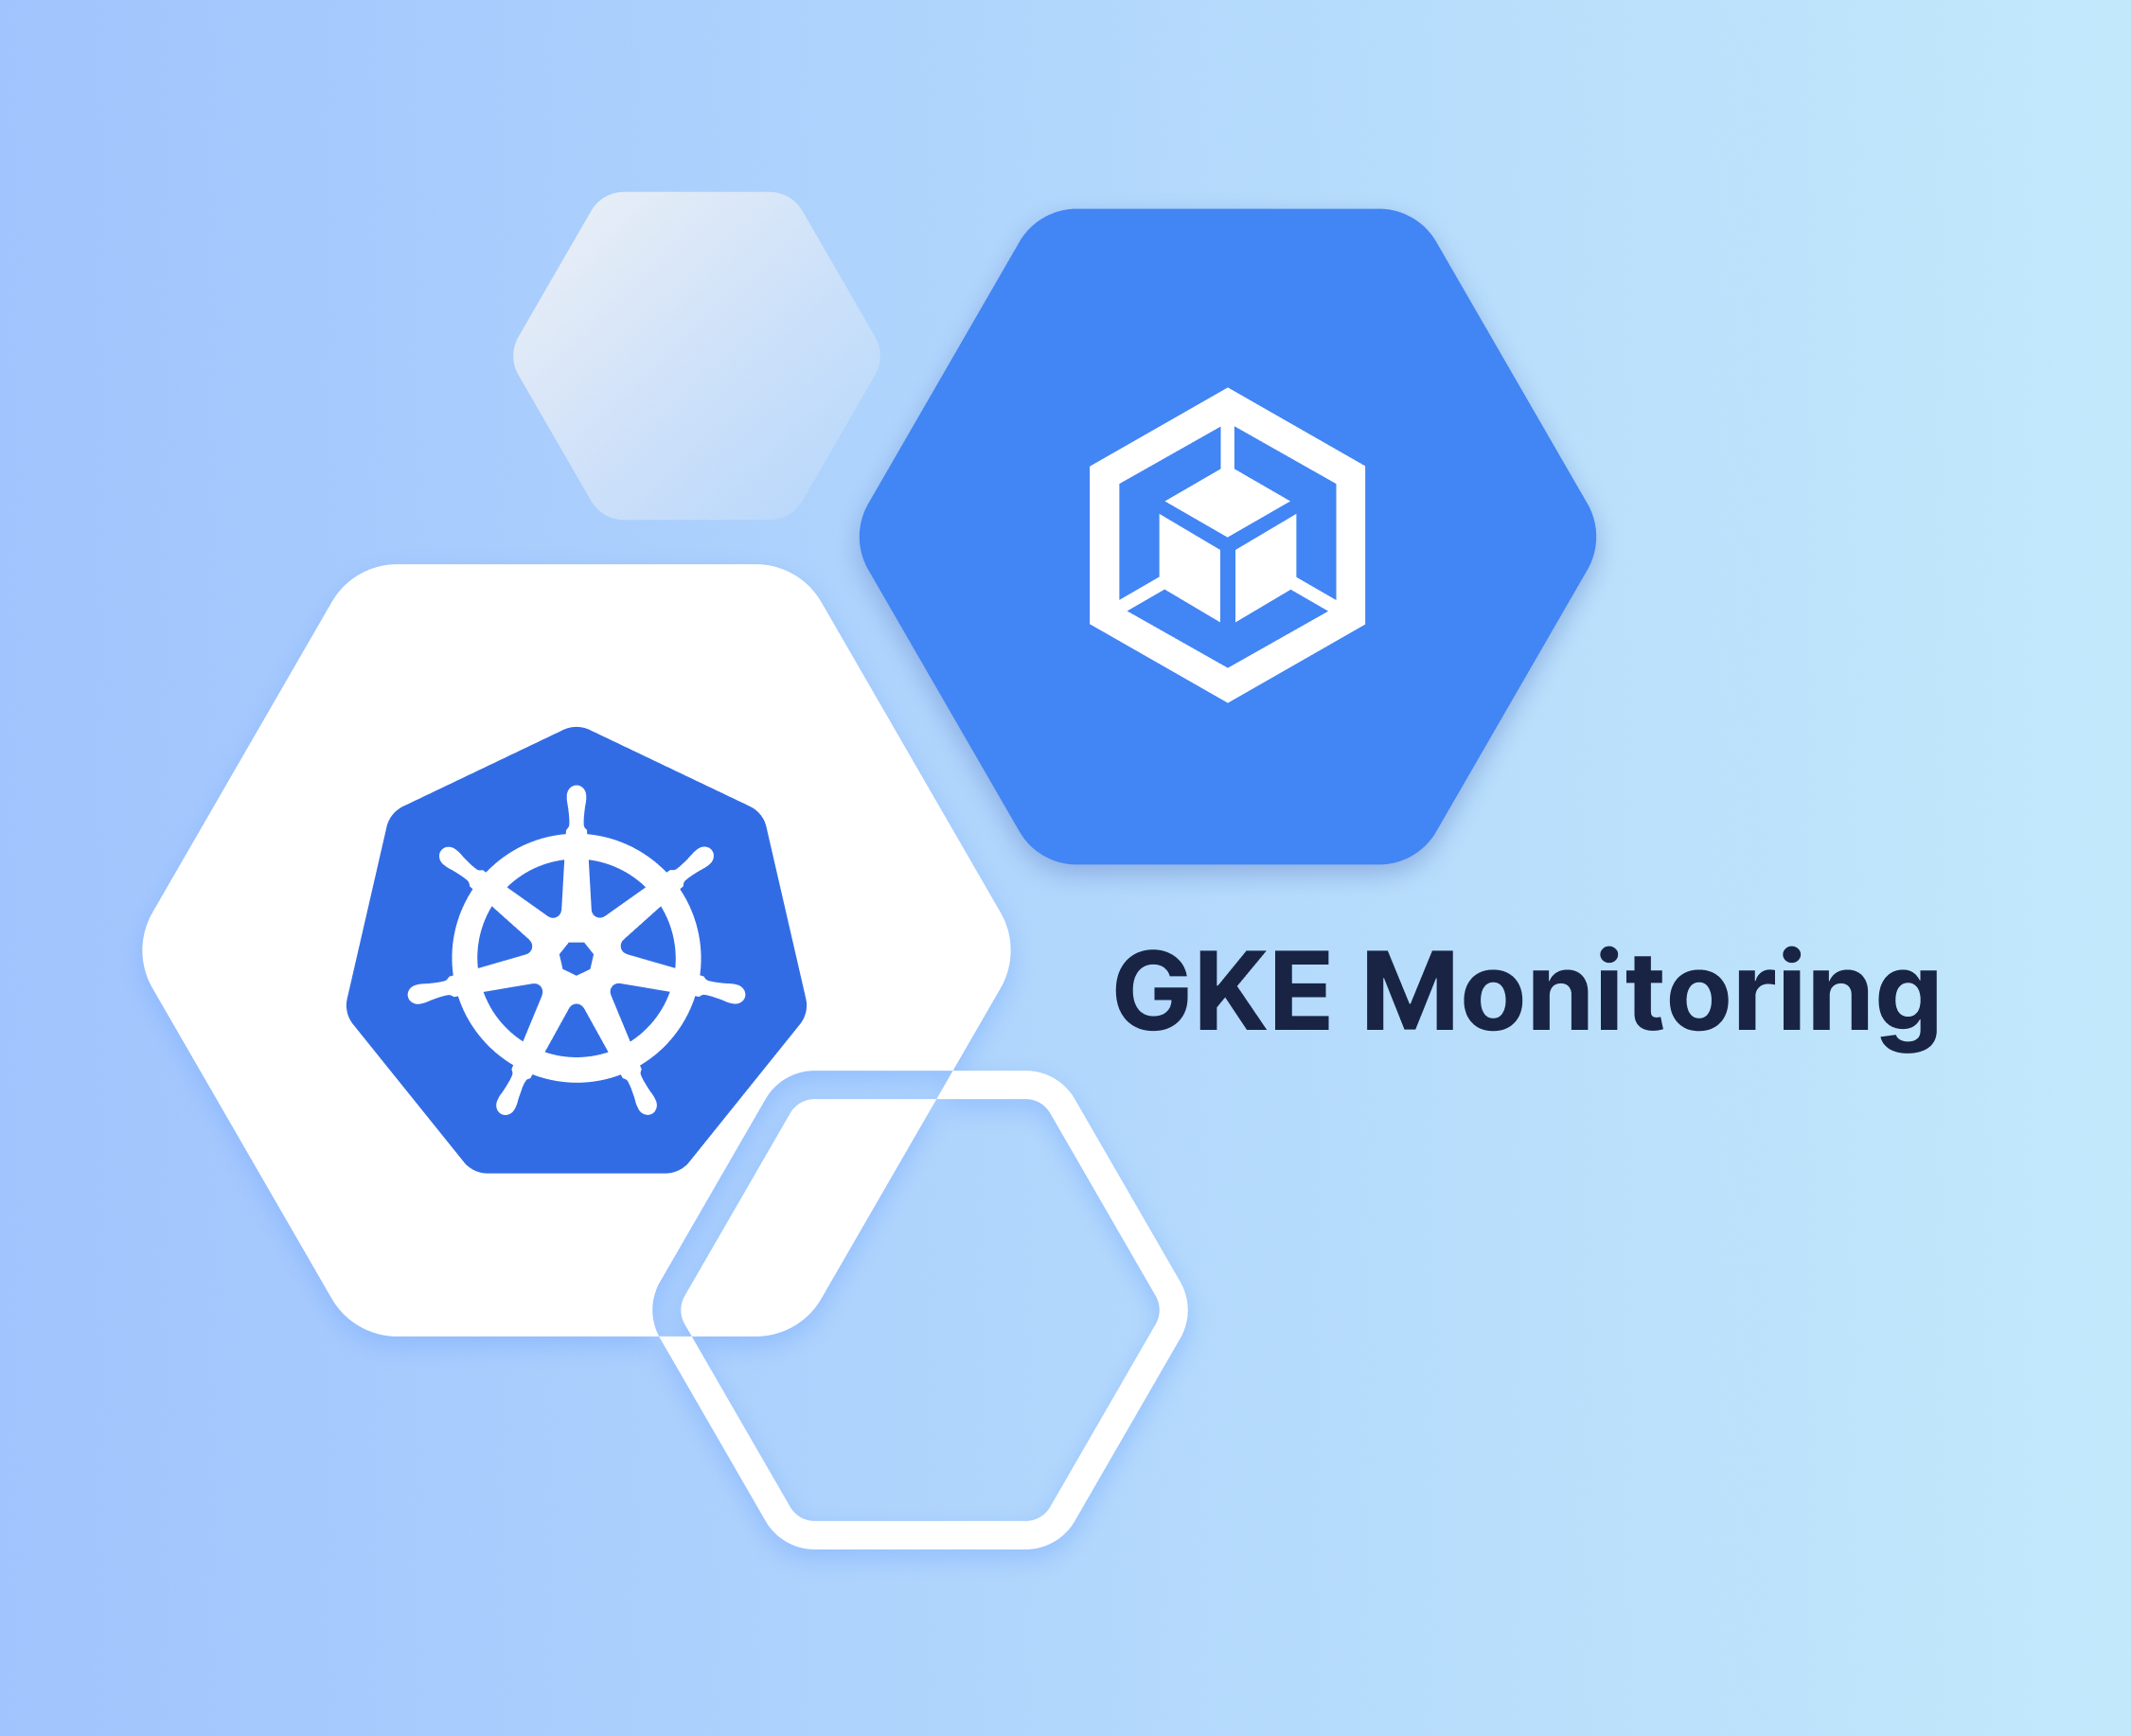 GKE monitoring best practices & tools